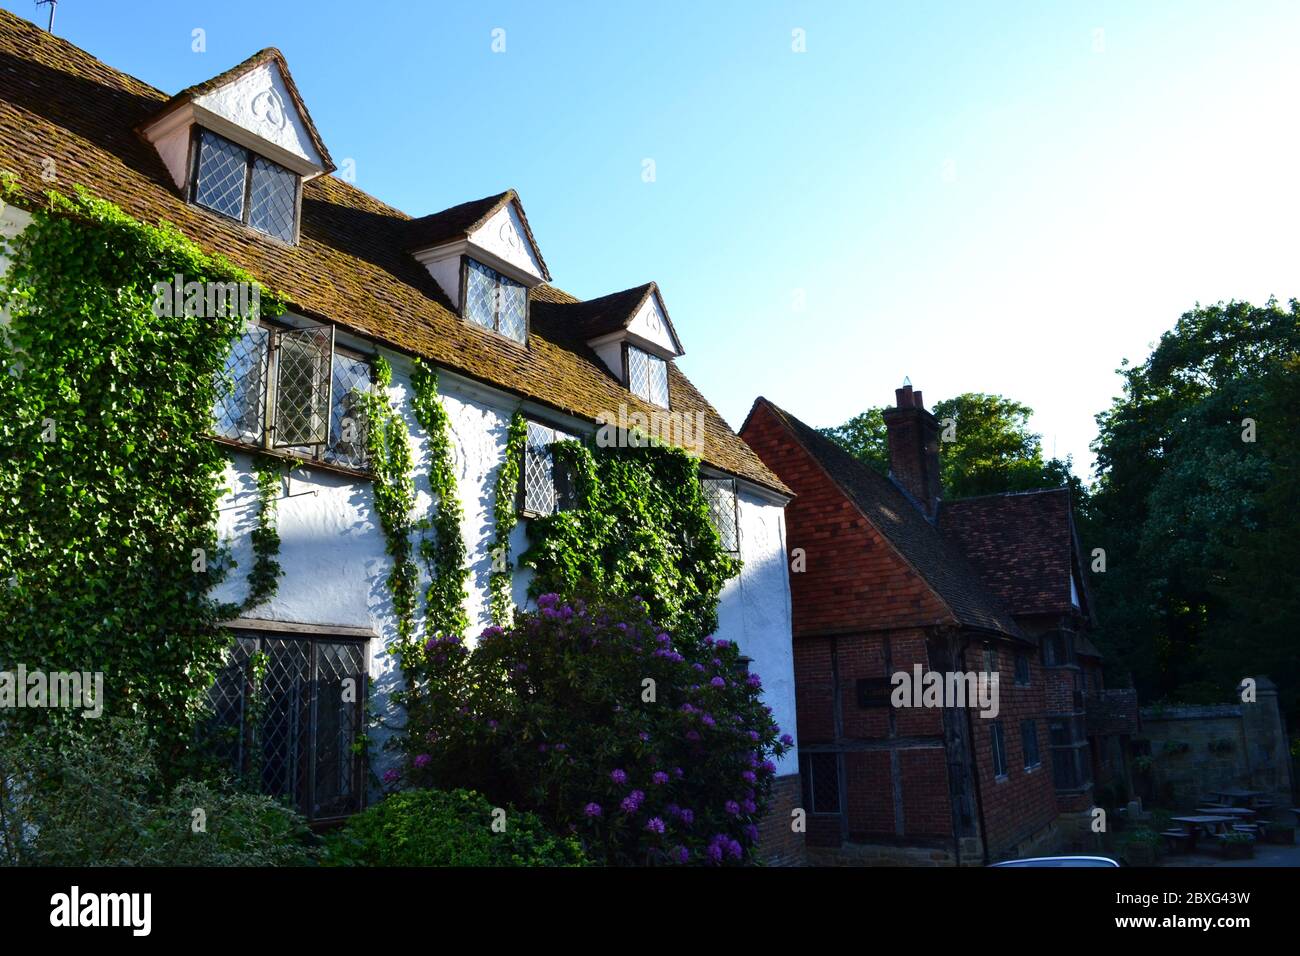 500-year-old Tudor house (15th century) at Chiddingstone, Kent, covered in climbing plants on a sunny day in May Stock Photo